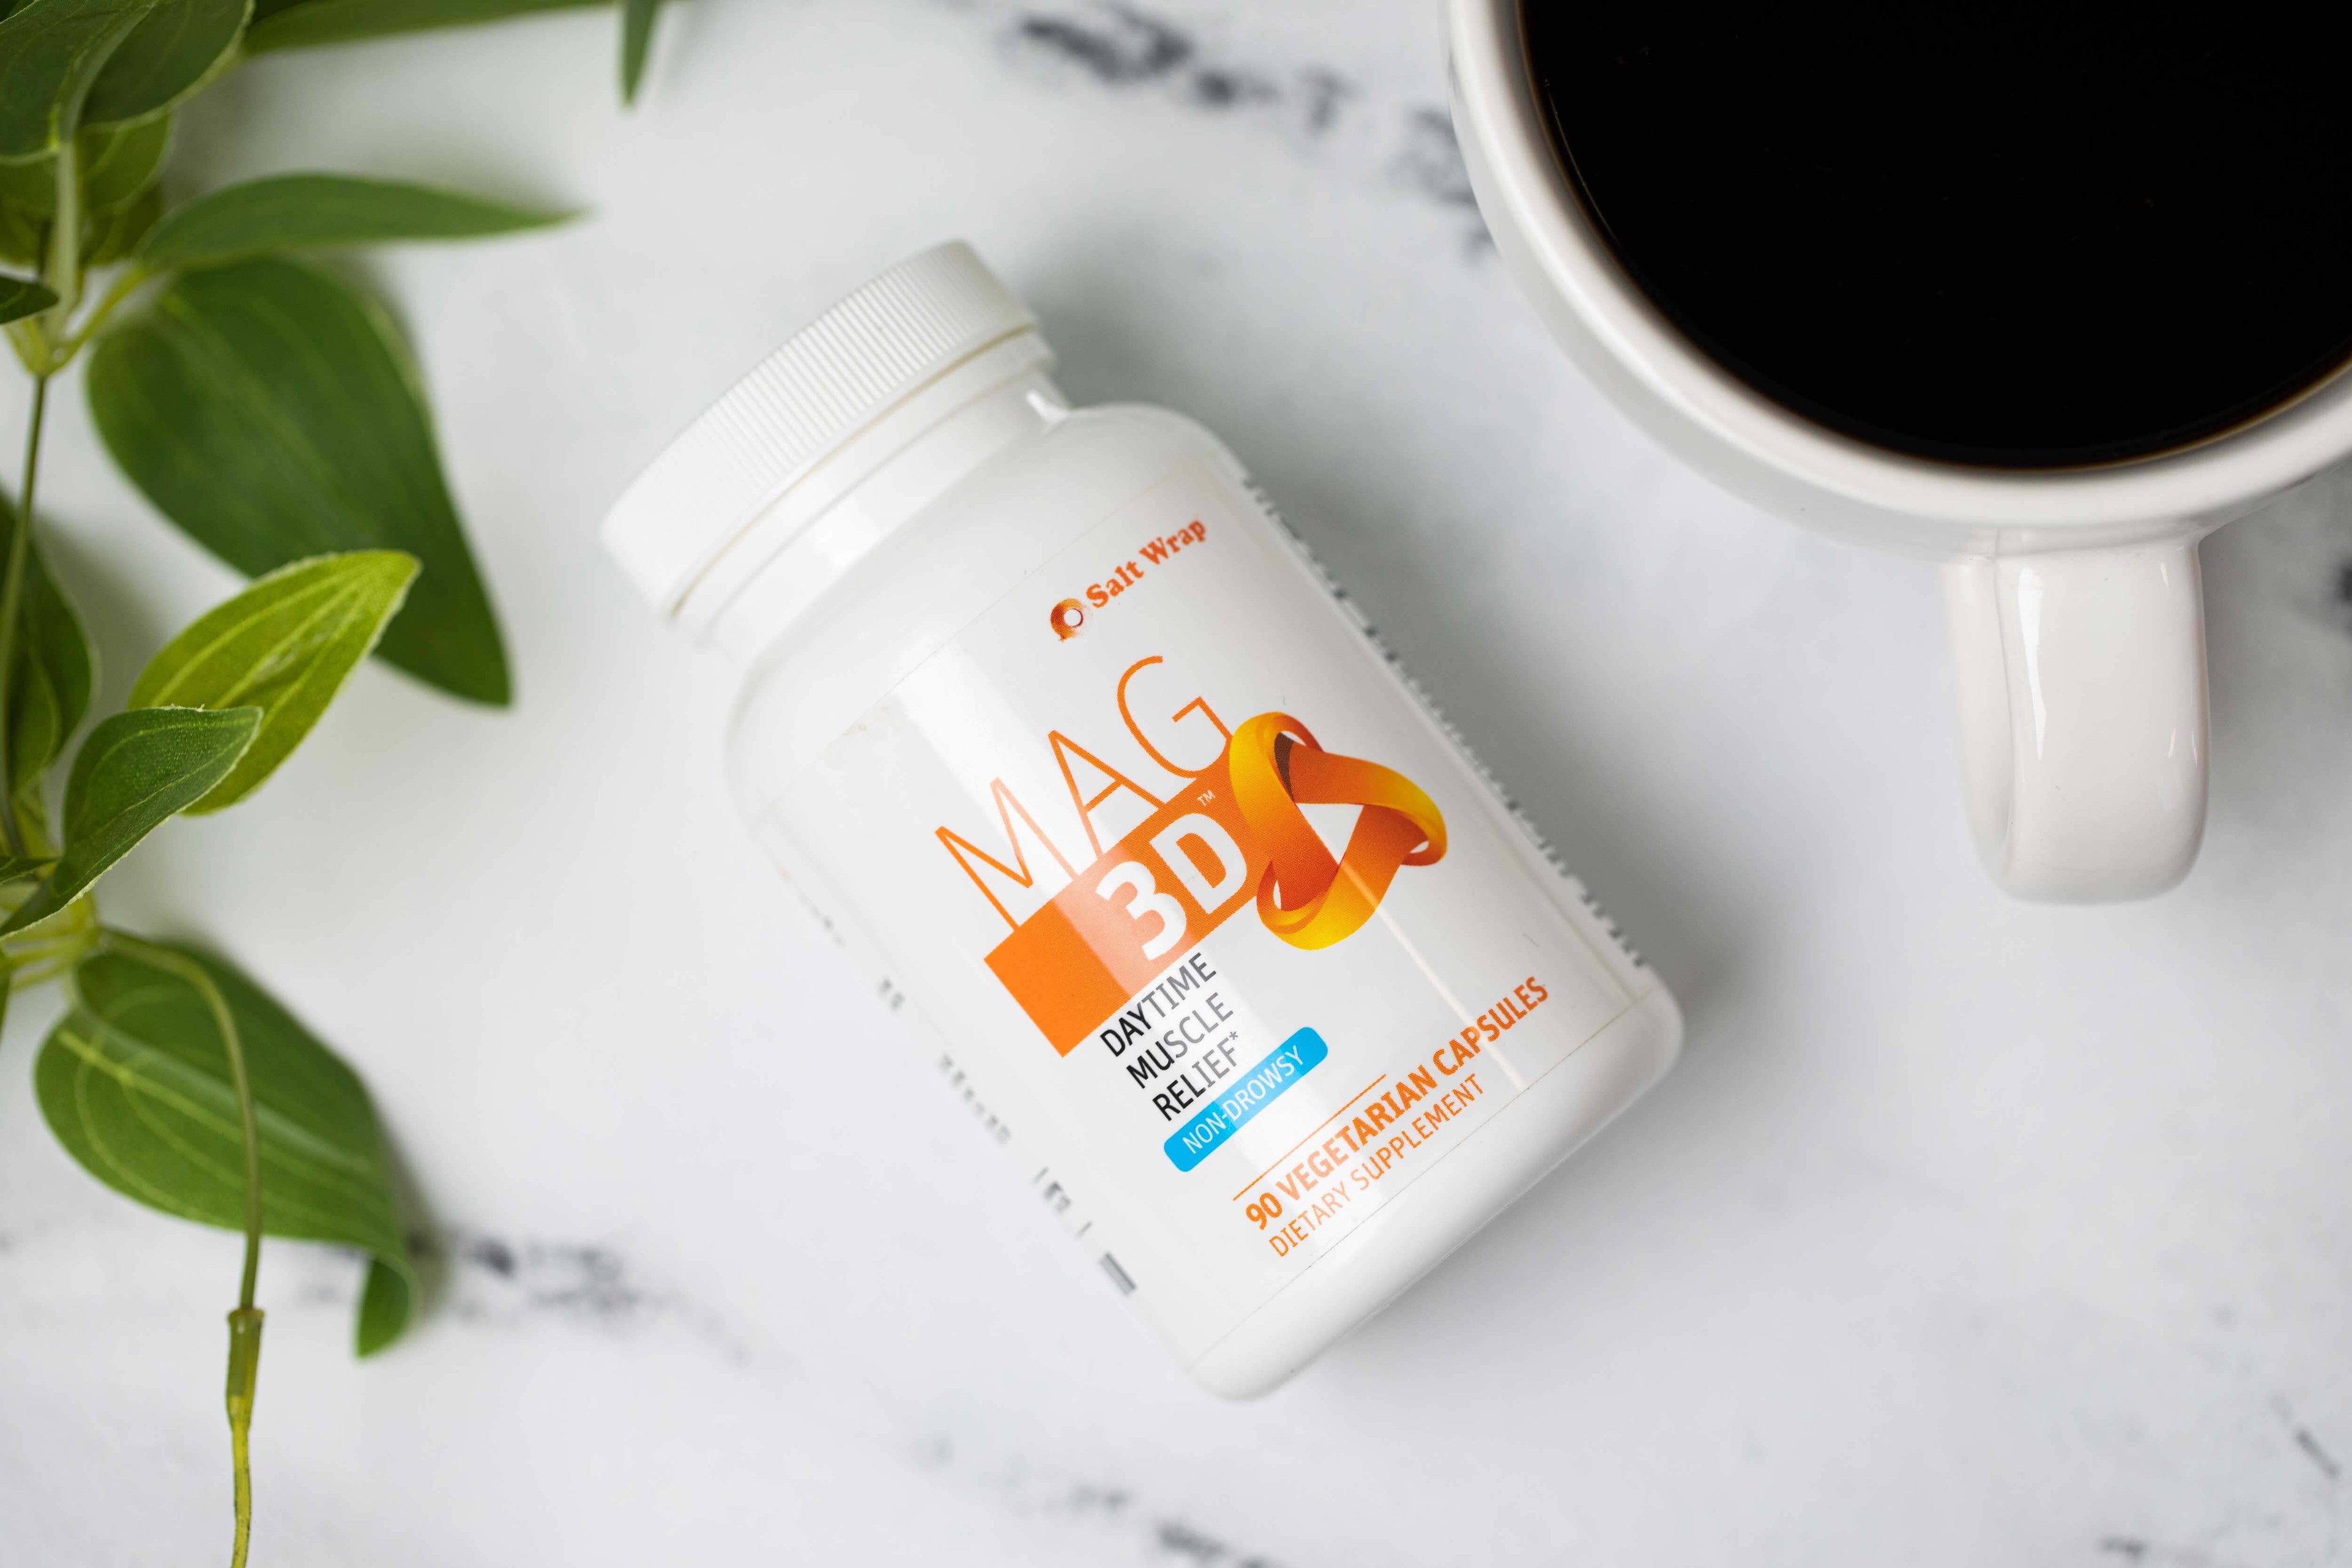 Mag 3D™ is designed to help put optimal nerve health (and natural daytime energy) within reach.